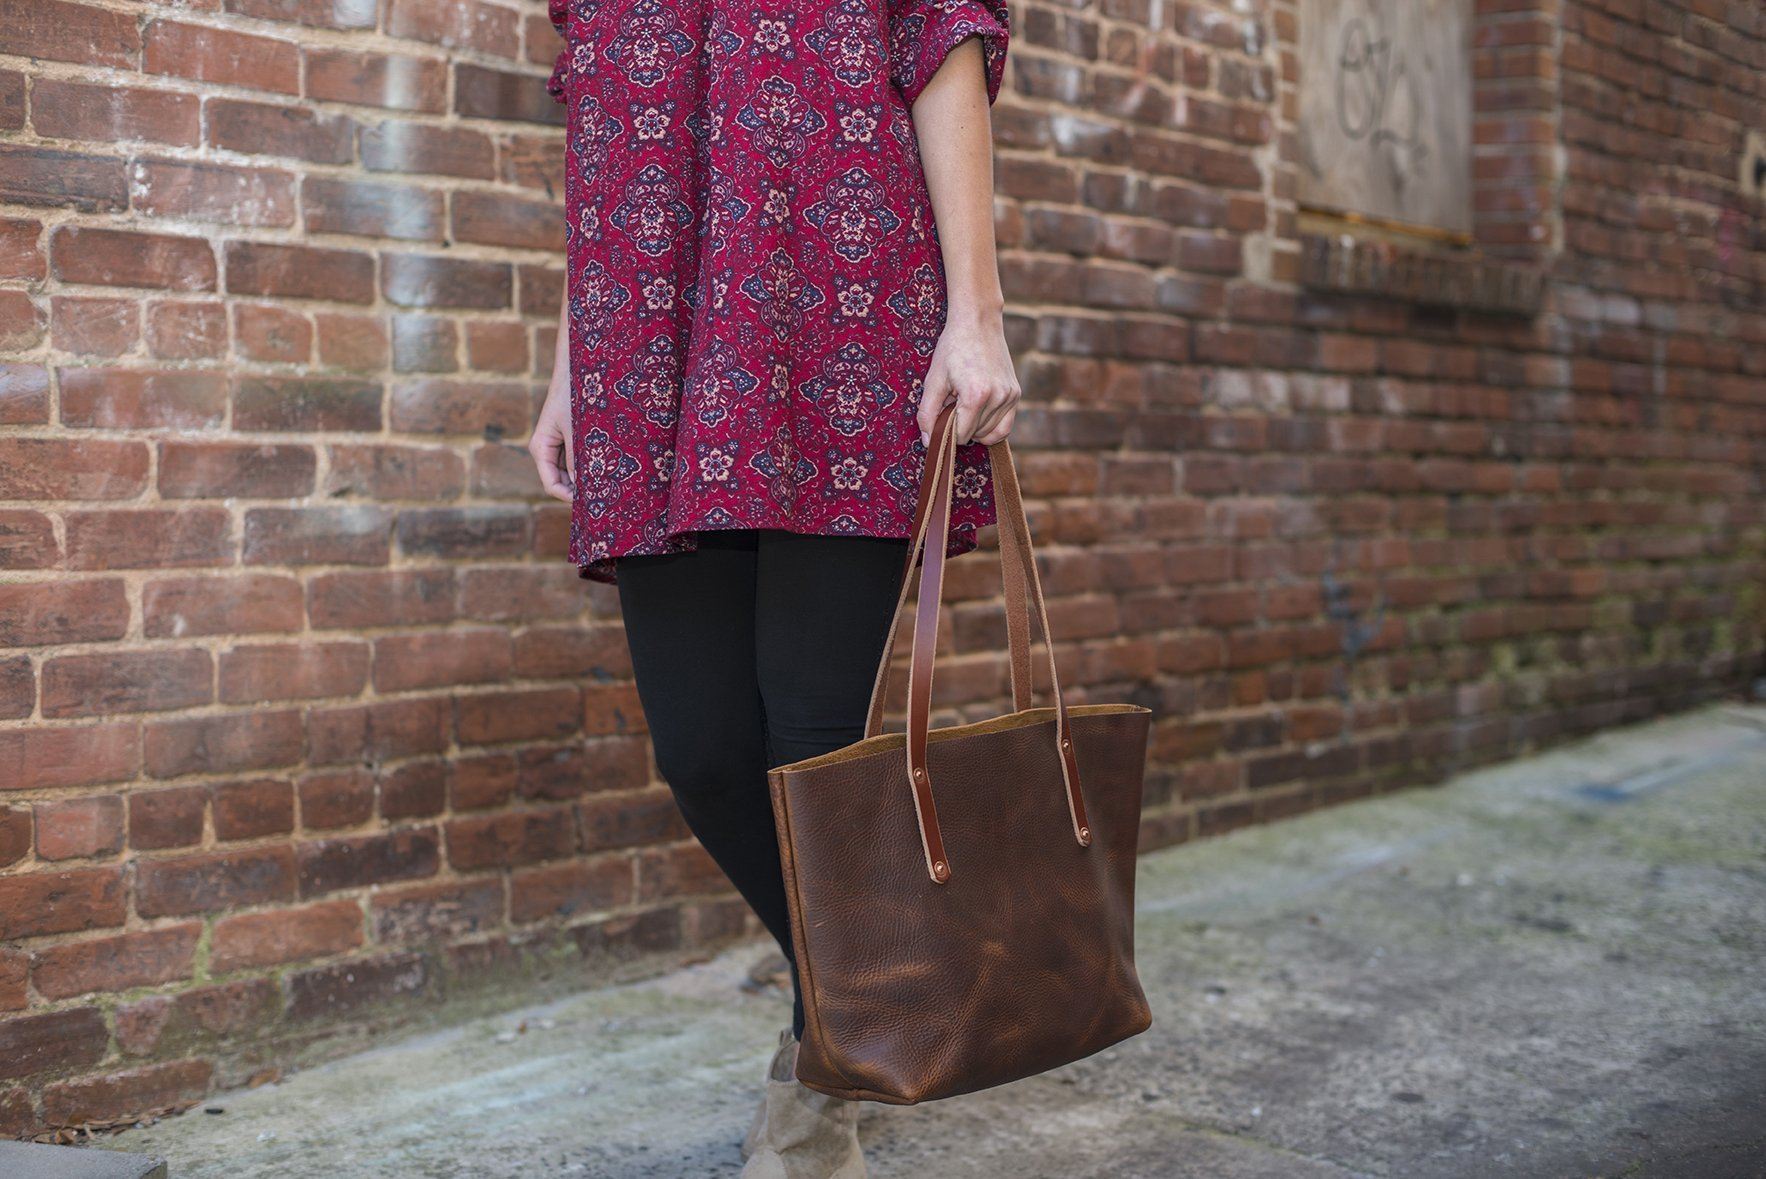 What’s Your Ideal Leather Tote Bag?